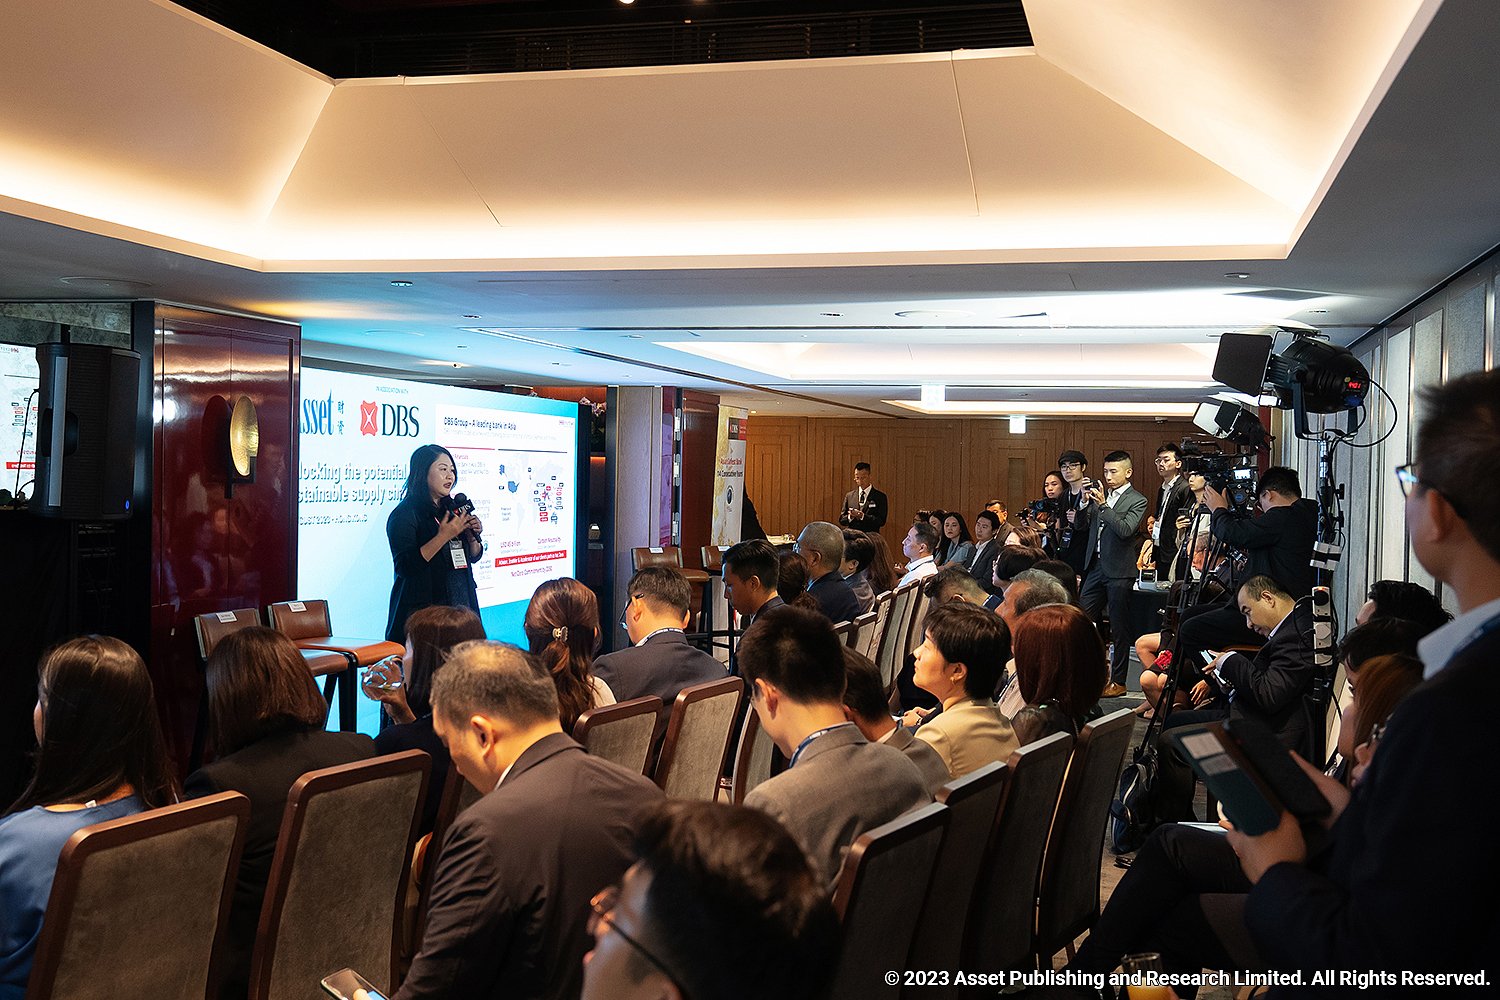 Sandy Tan, head of ecosystems, institutional banking group at DBS Hong Kong making her presentation on Building sustainable supply chains with DBS 